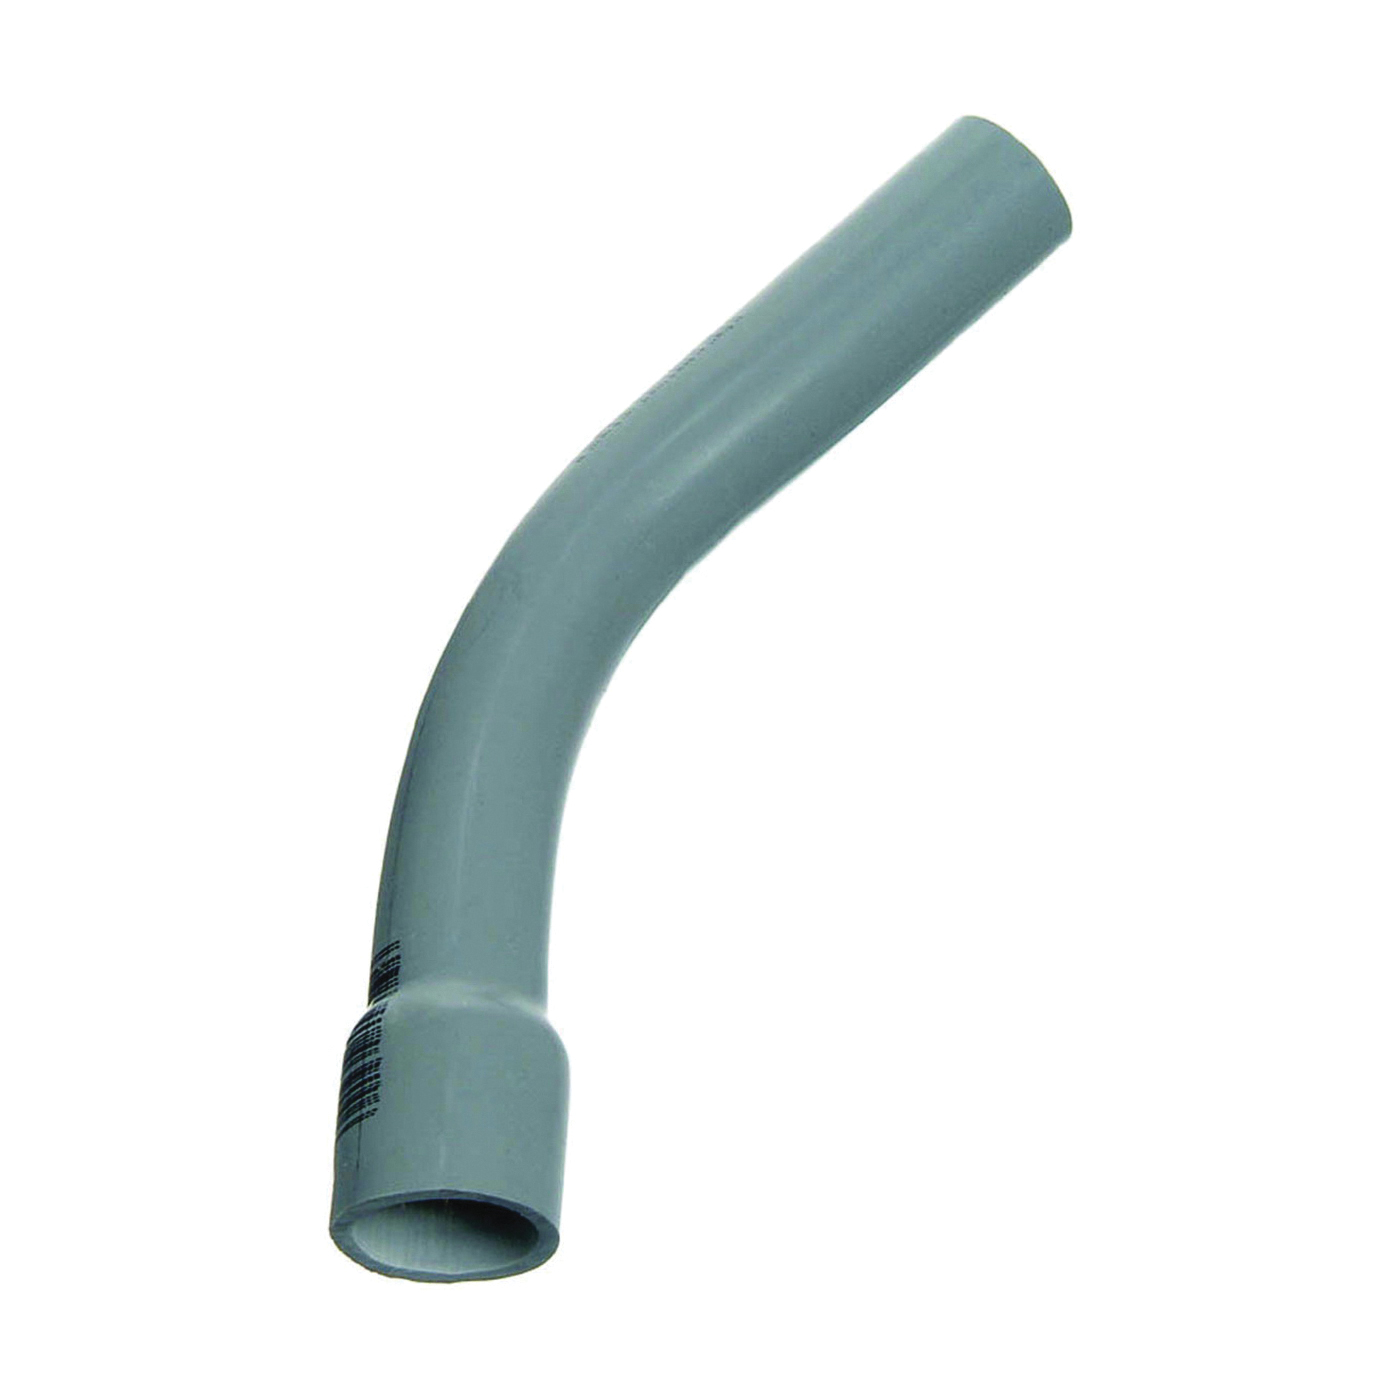 UA7AKB-CAR Elbow, 2-1/2 in Trade Size, 45 deg Angle, SCH 80 Schedule Rating, PVC, Bell End, Gray